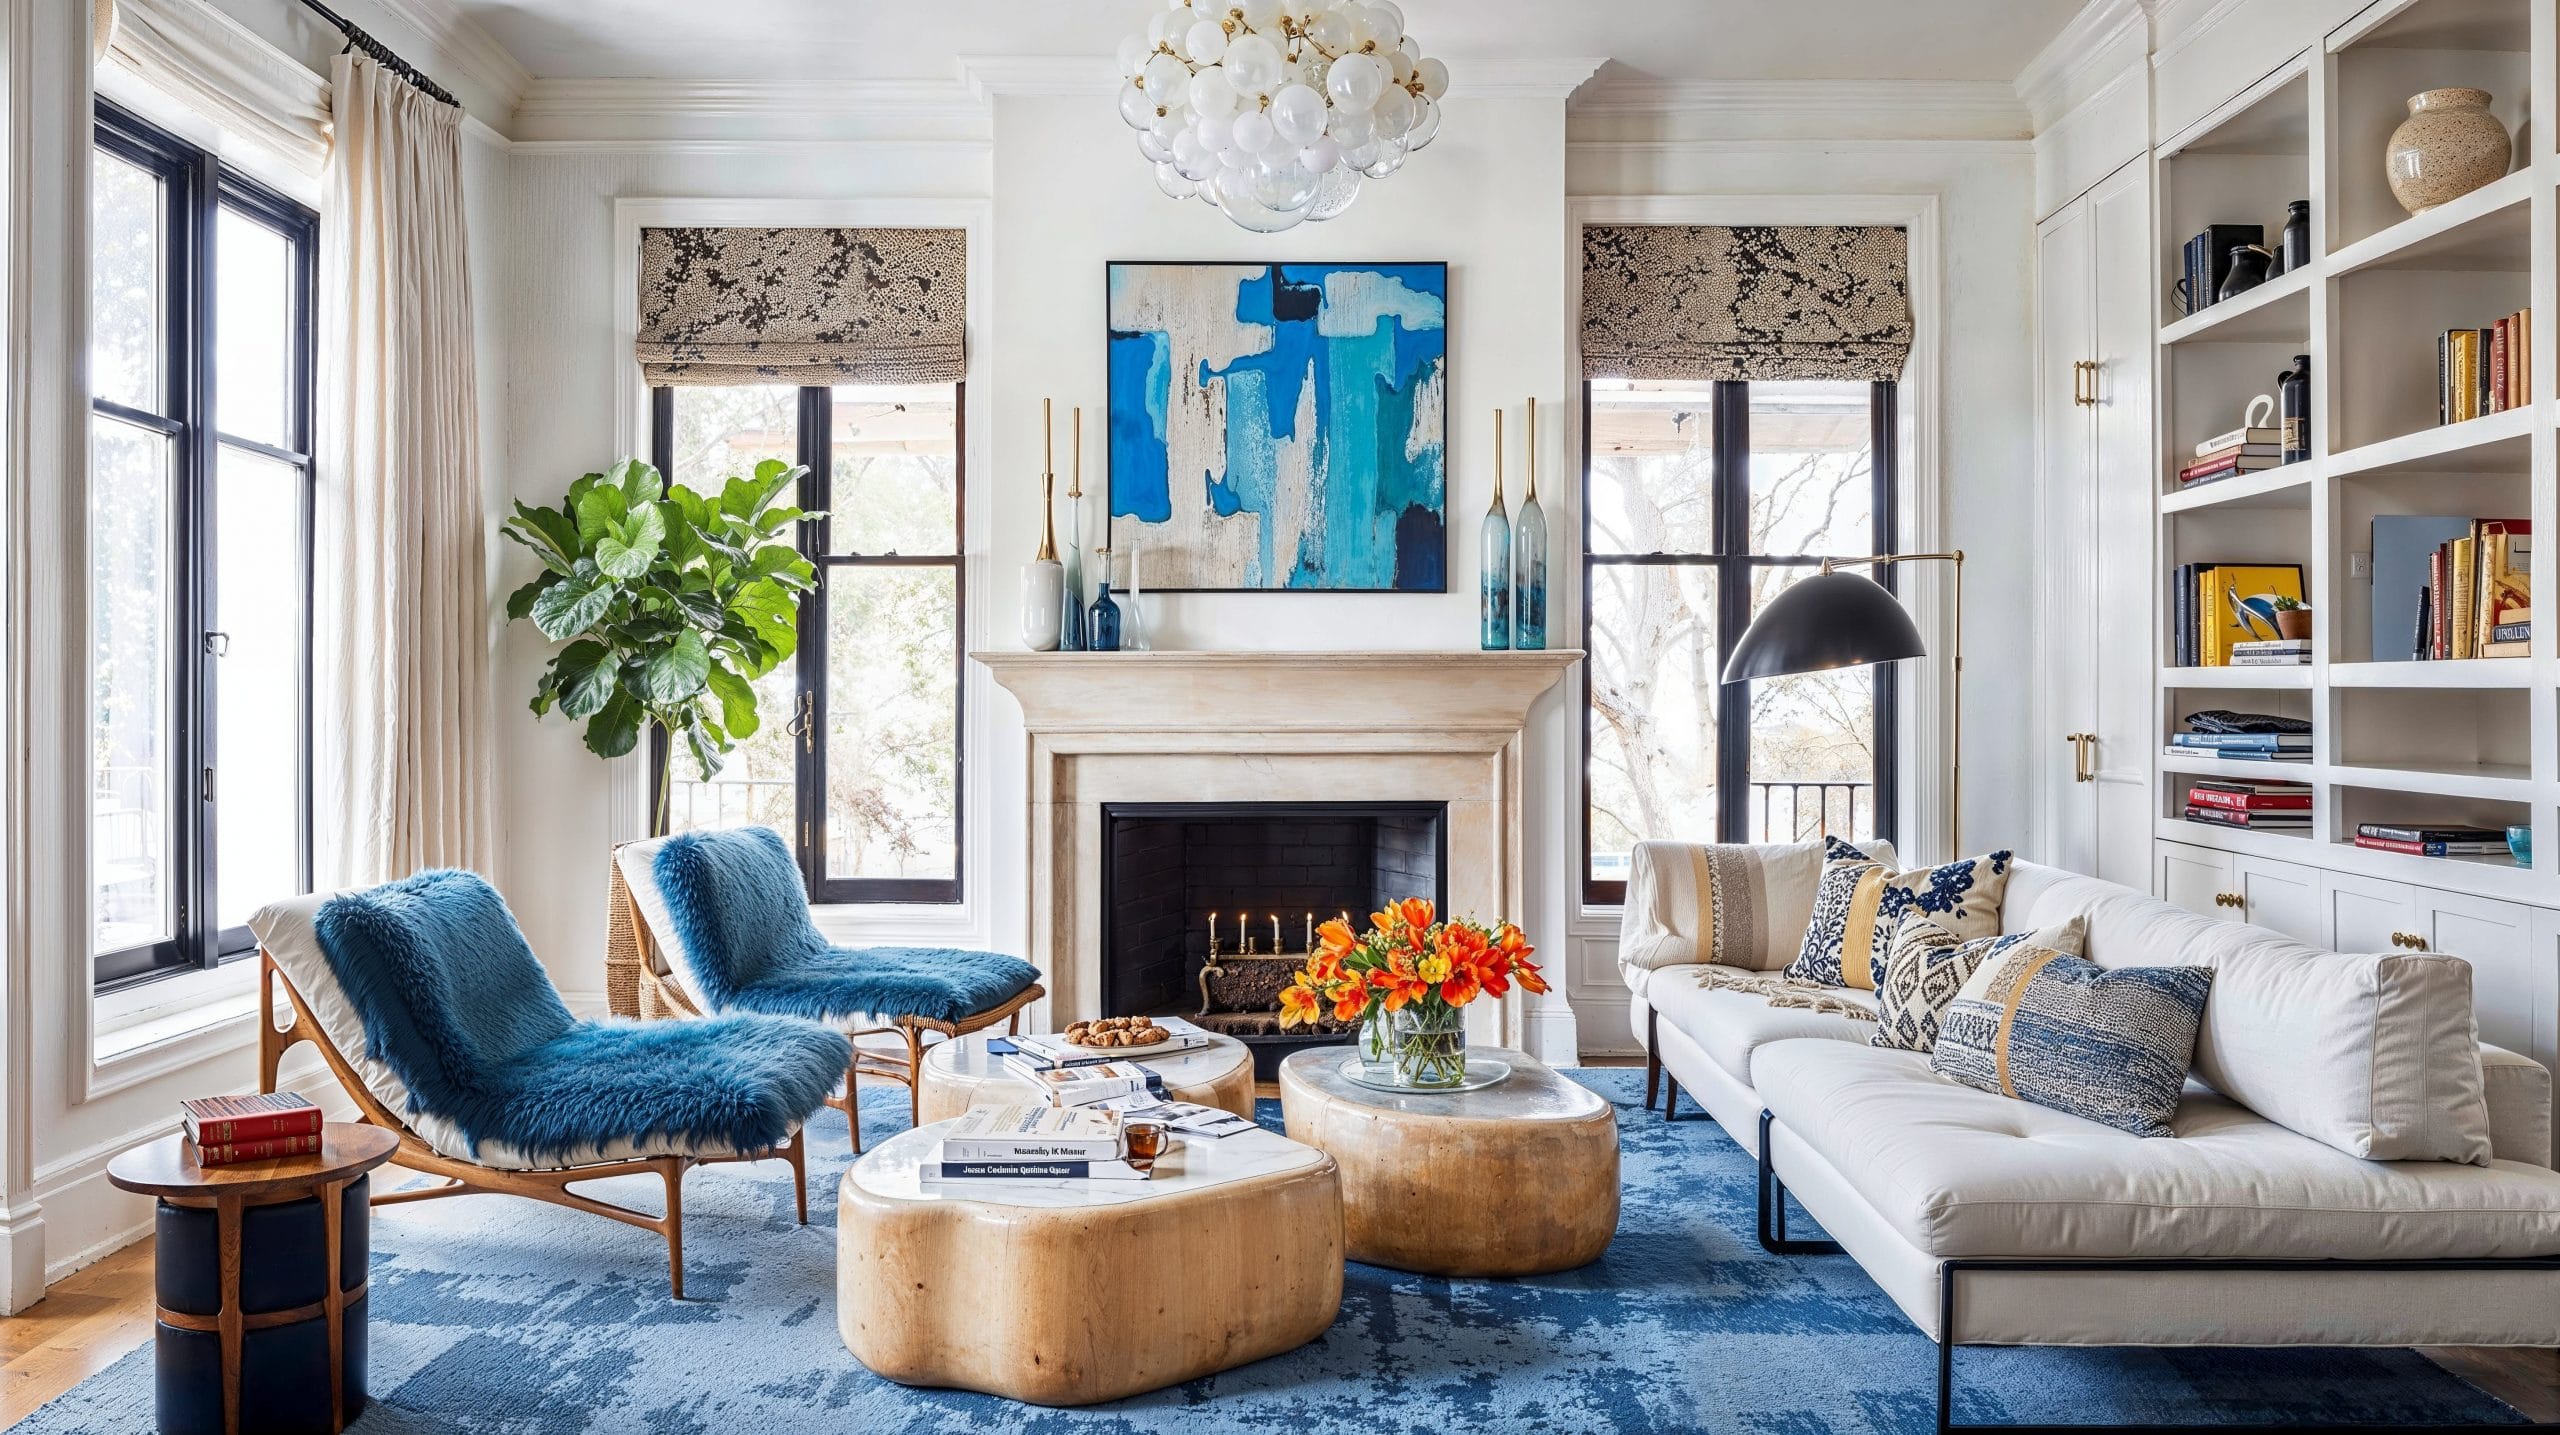 Interior Design Styles 101: The Ultimate Guide To Decorating